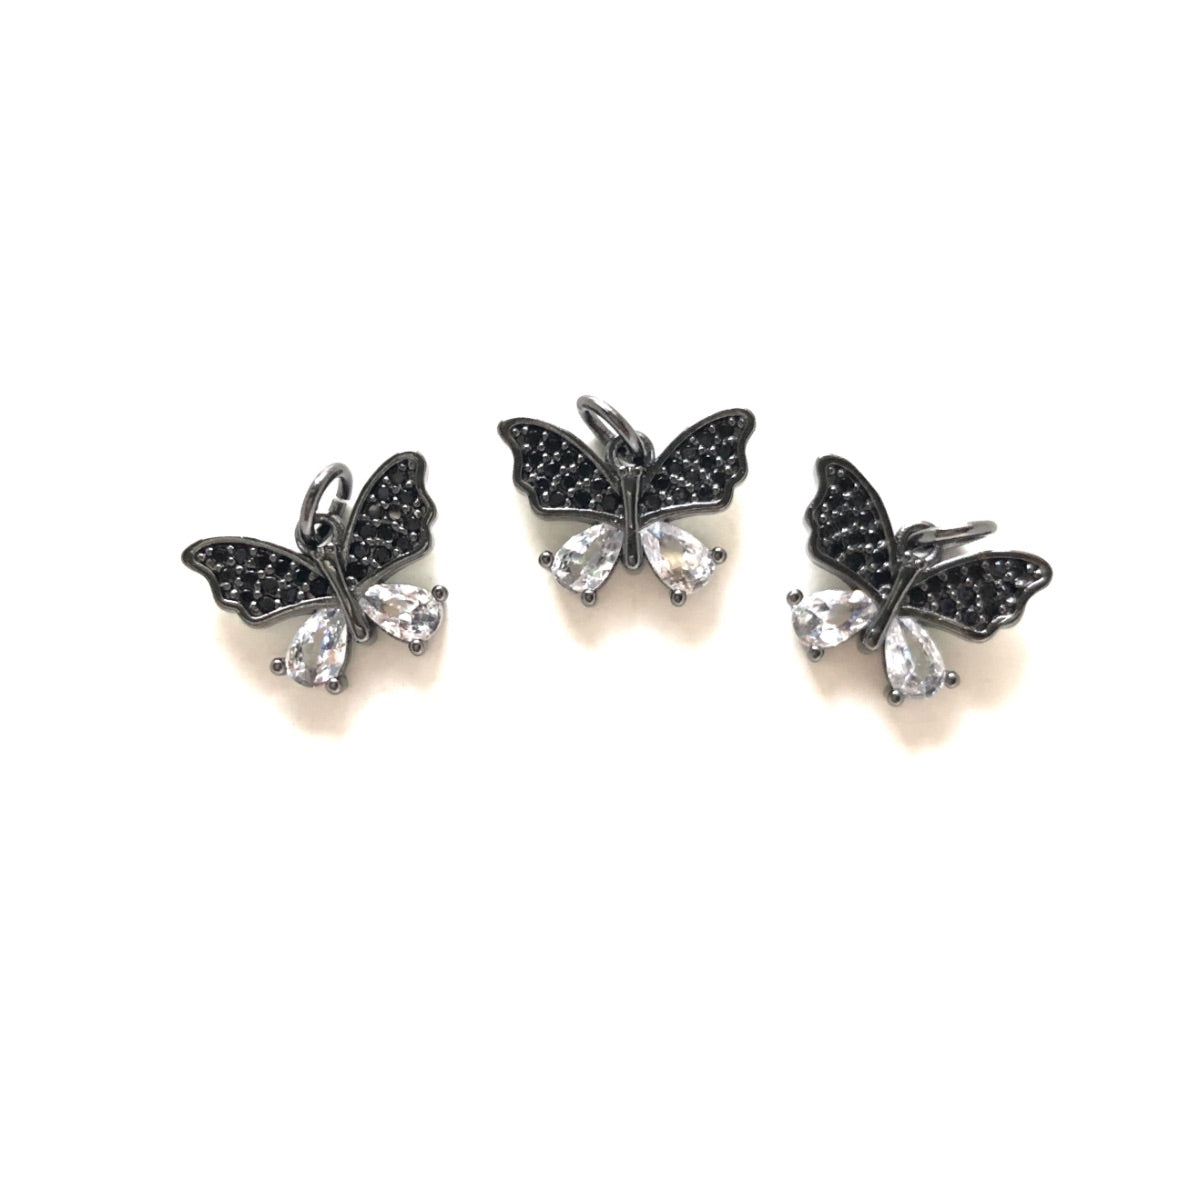 10pcs/lot 14*11mm Small Size CZ Pave Butterfly Charms Black on Black CZ Paved Charms Butterflies Small Sizes Charms Beads Beyond